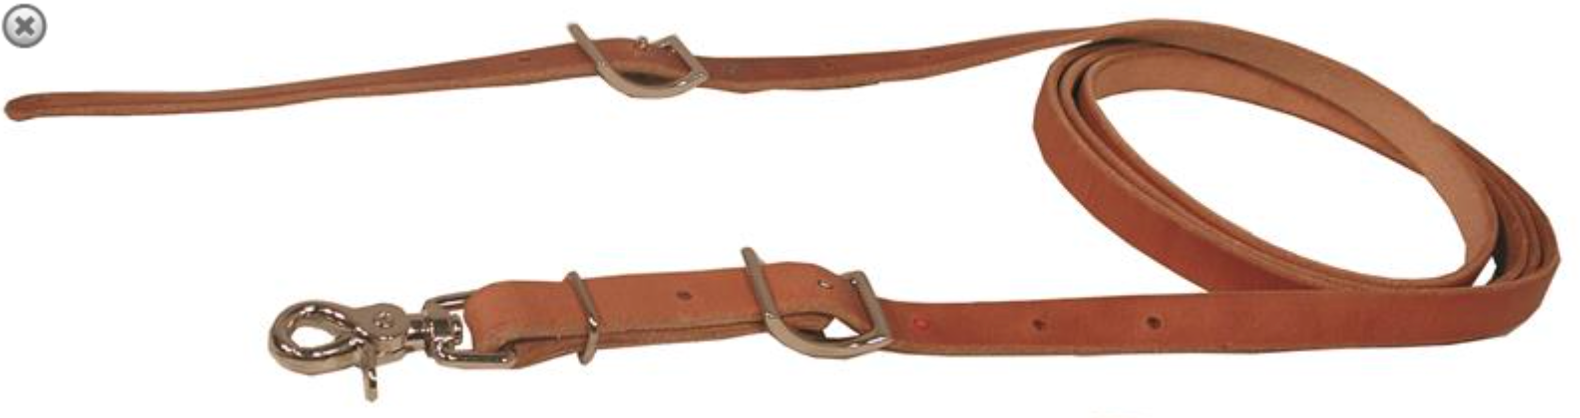 REIN, ROPING, 5/8" x 7', HARNESS LEATHER